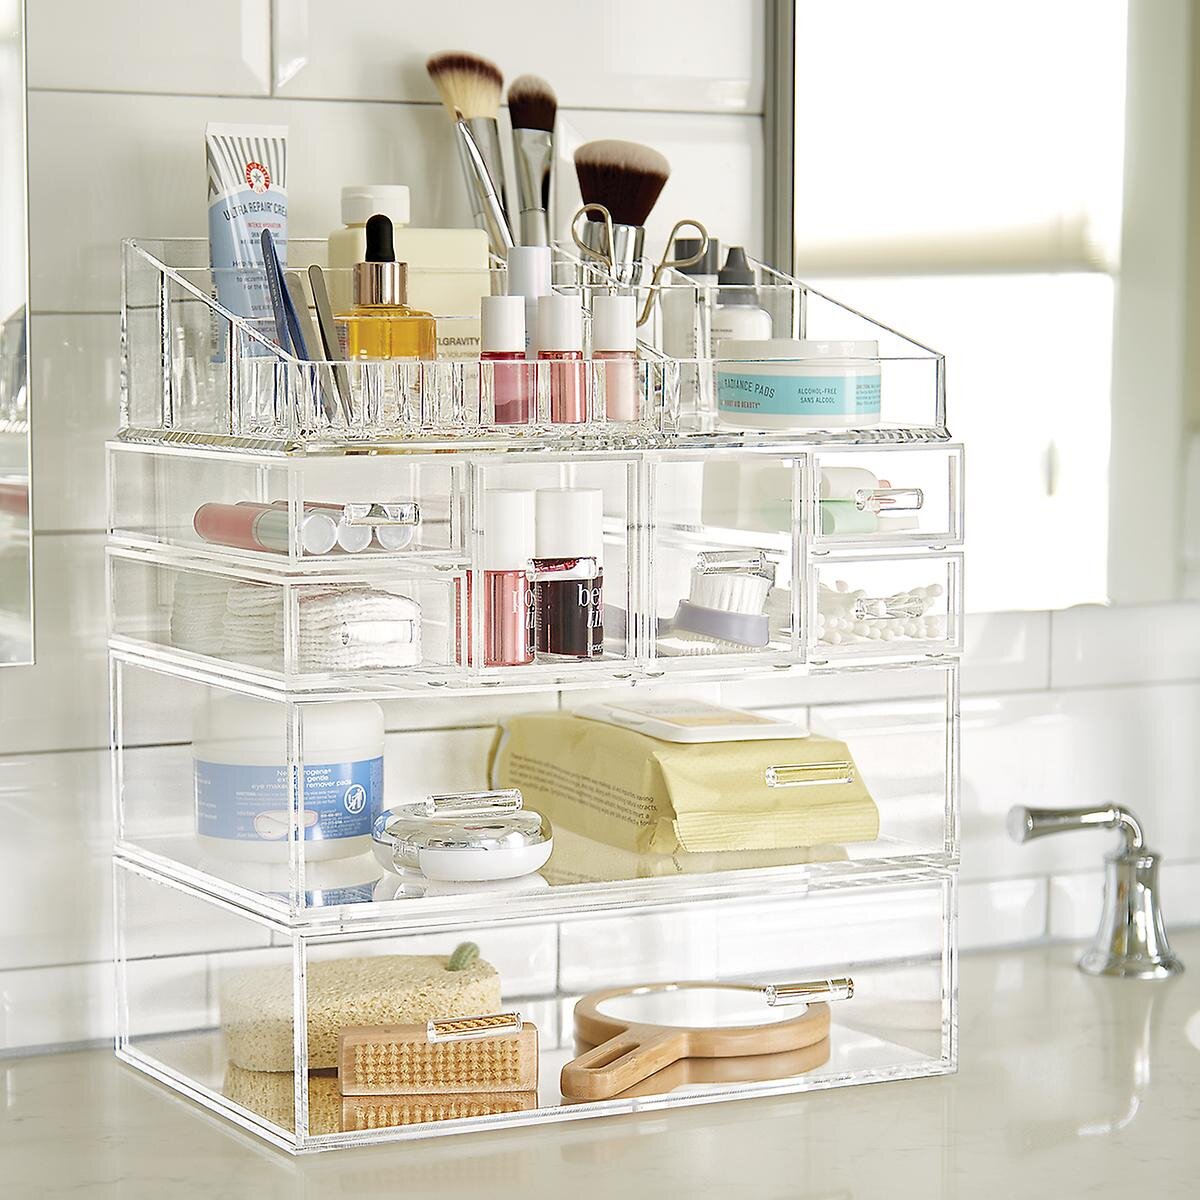 Great for displaying and organizing makeup on the counter.